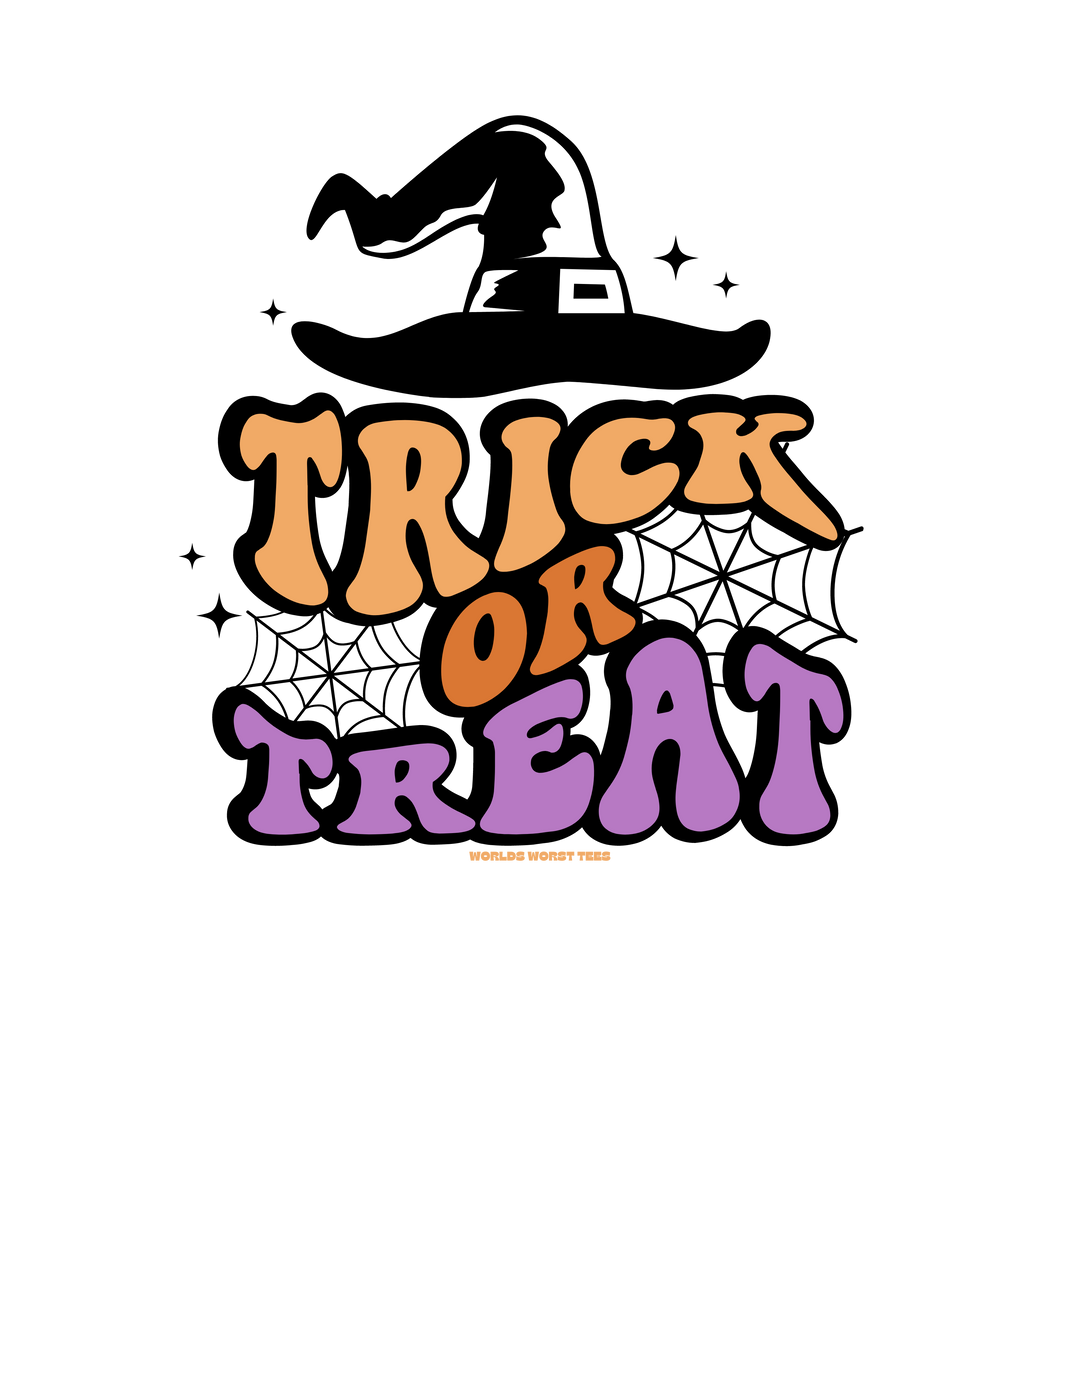 A black background with orange and purple text, featuring a trick or treat sign and a close-up of a letter. Infant long sleeve bodysuit for durability and comfort, with ribbed knitting and plastic snaps for easy changing.